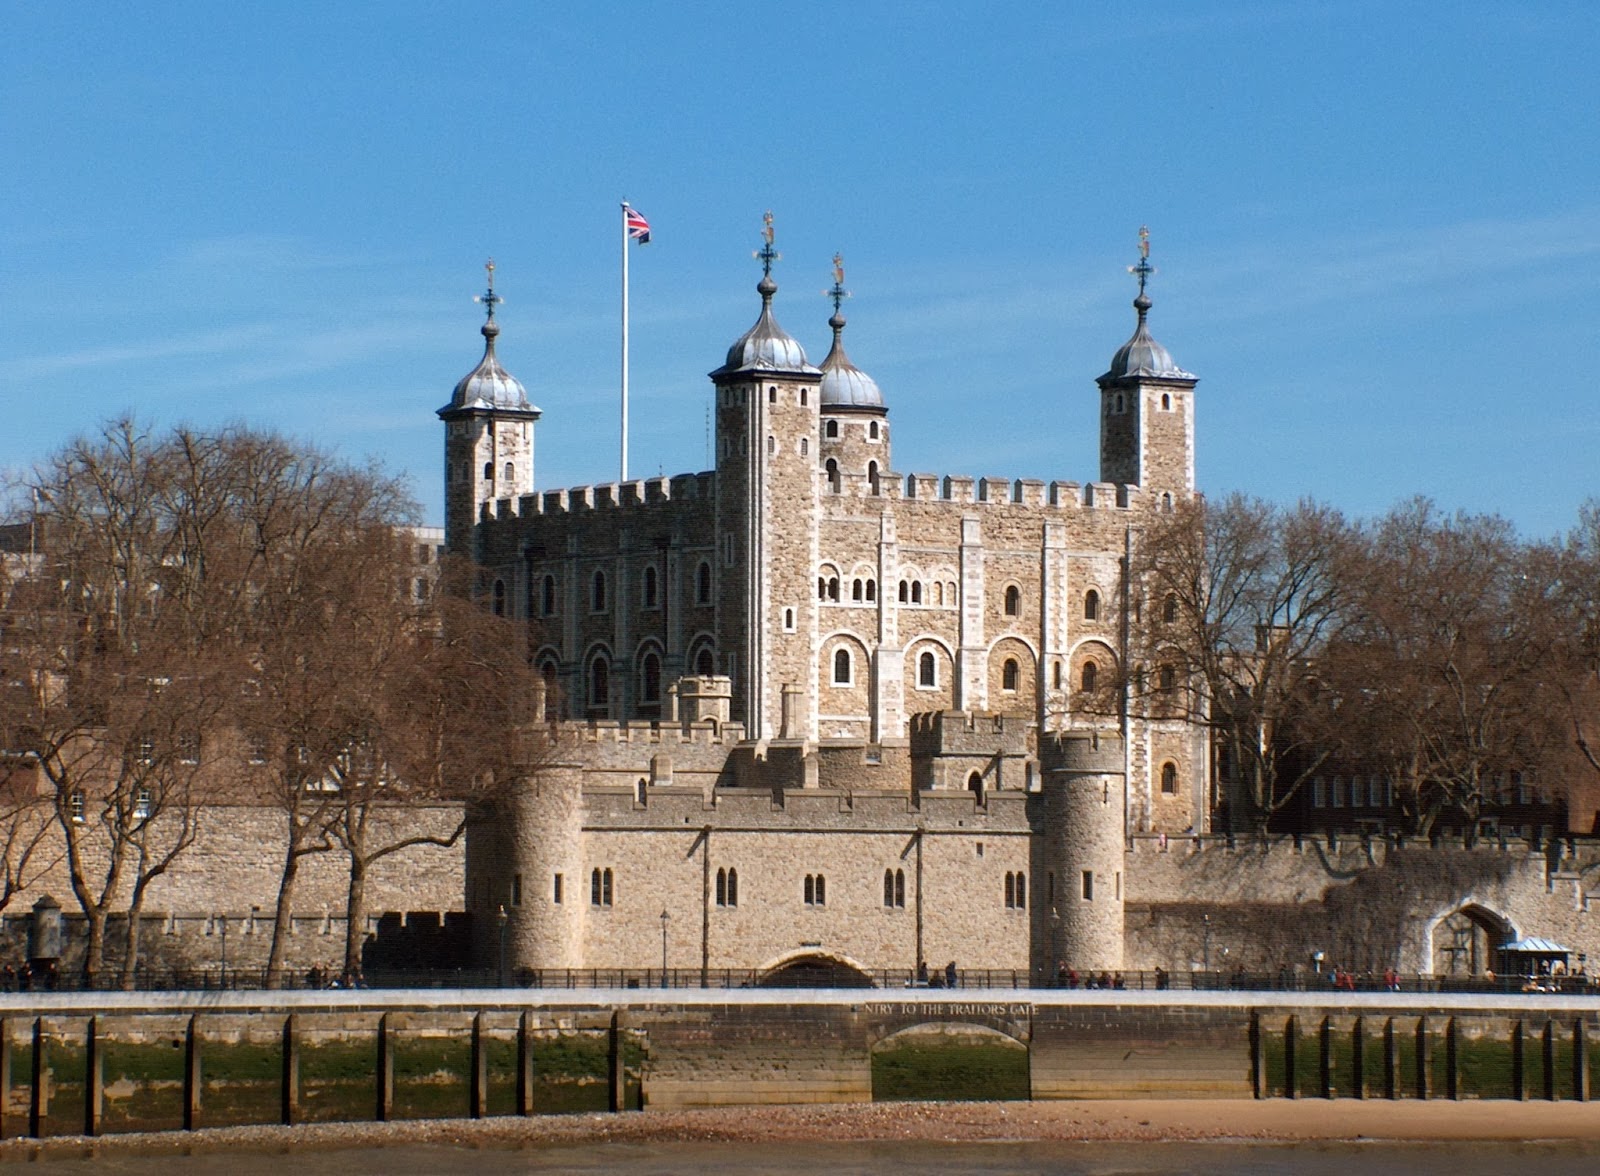 europe, london, place to visit,tourist attractions in london, london tourist attractions